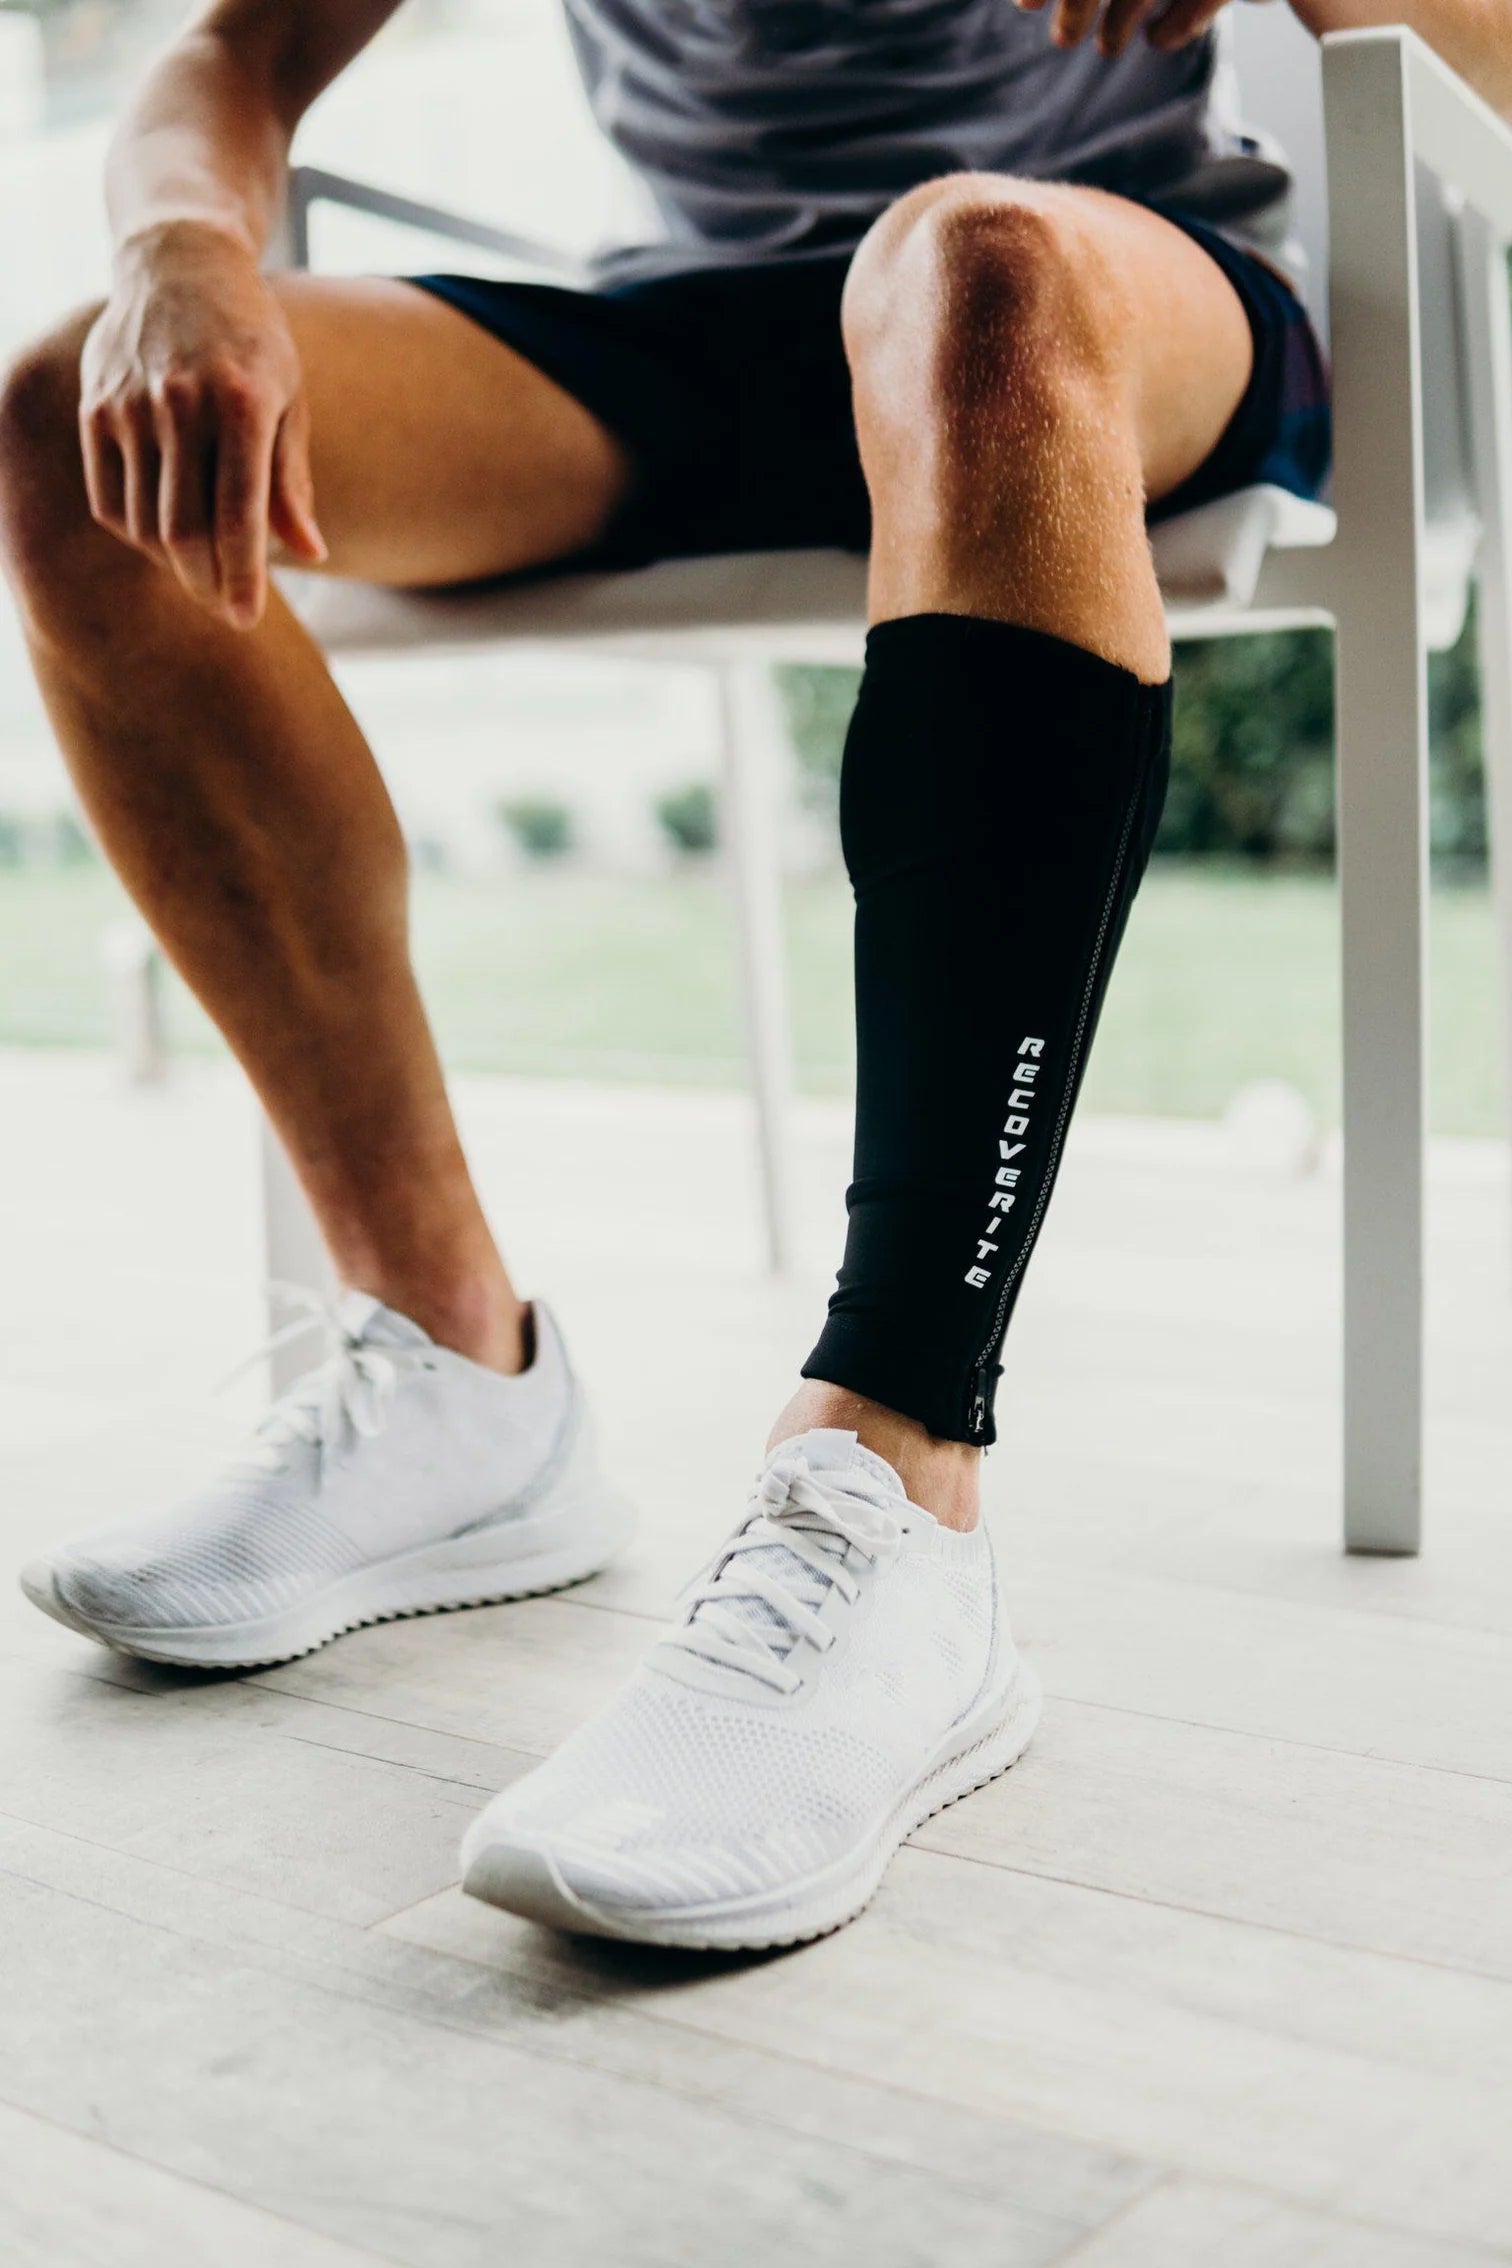 The Benefits & Features Of Wearing Recoverite Calf Compression Sleeves While Training